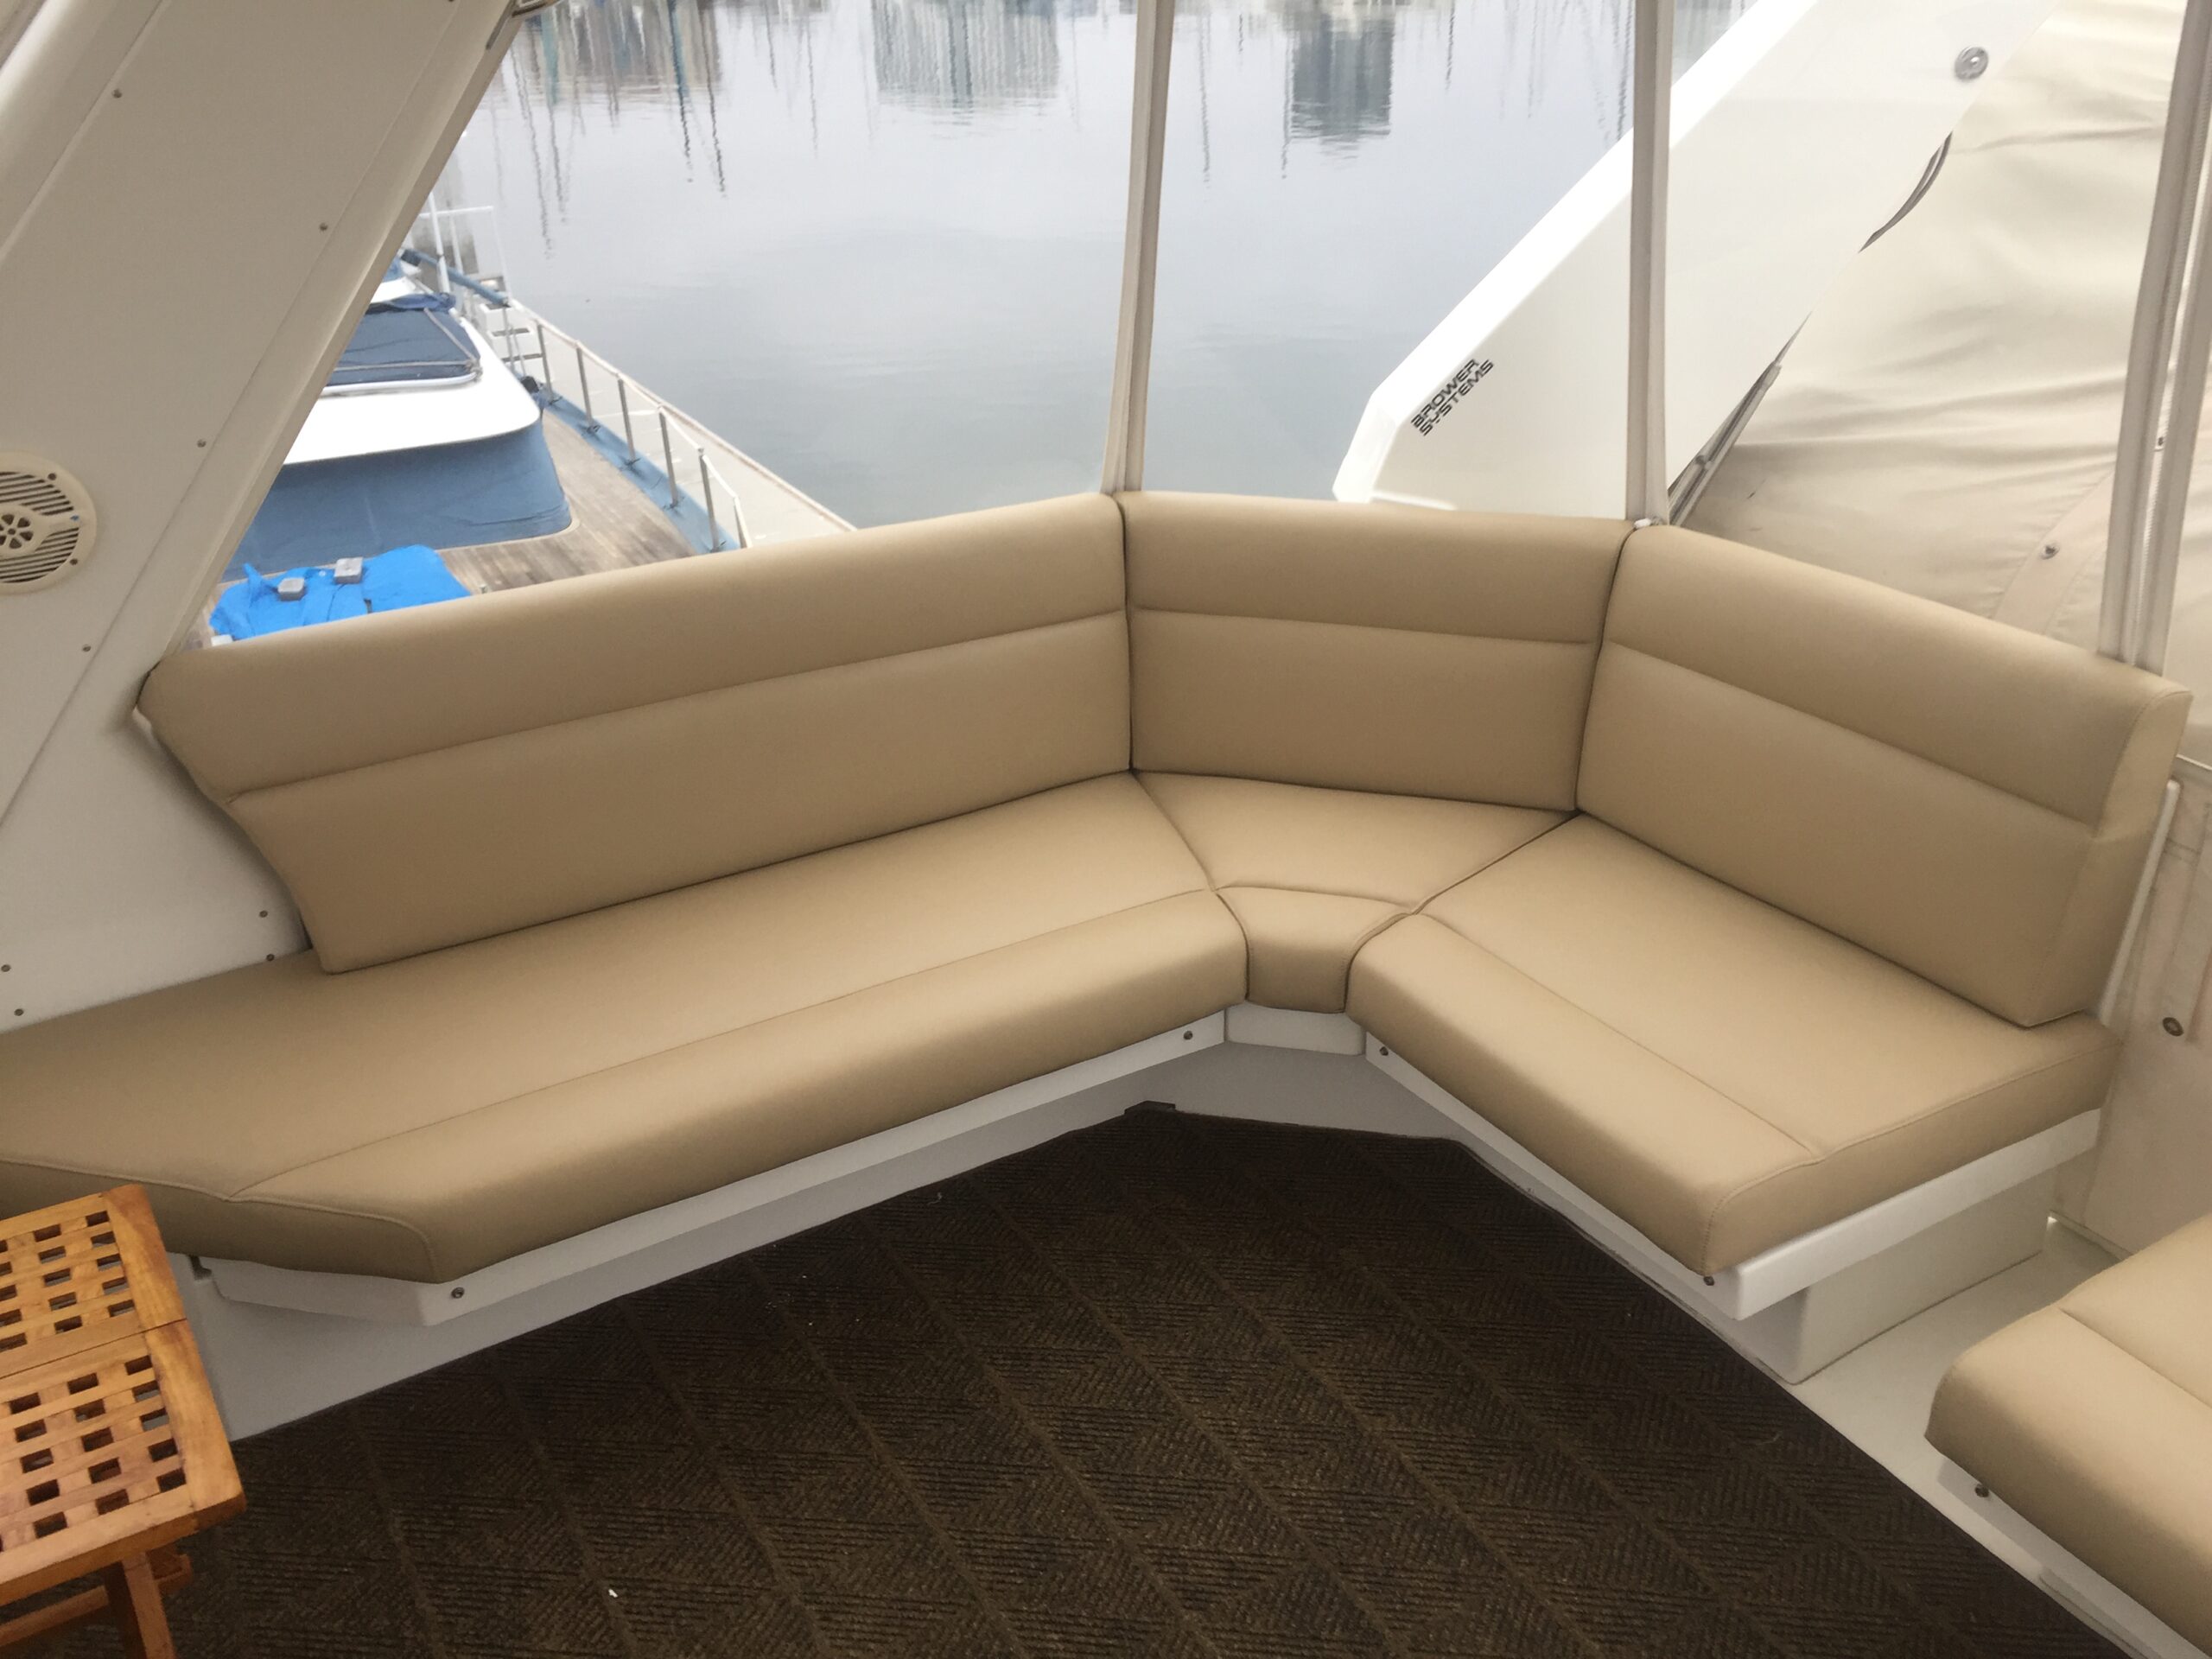 Custom Boat Cushions And Upholstery